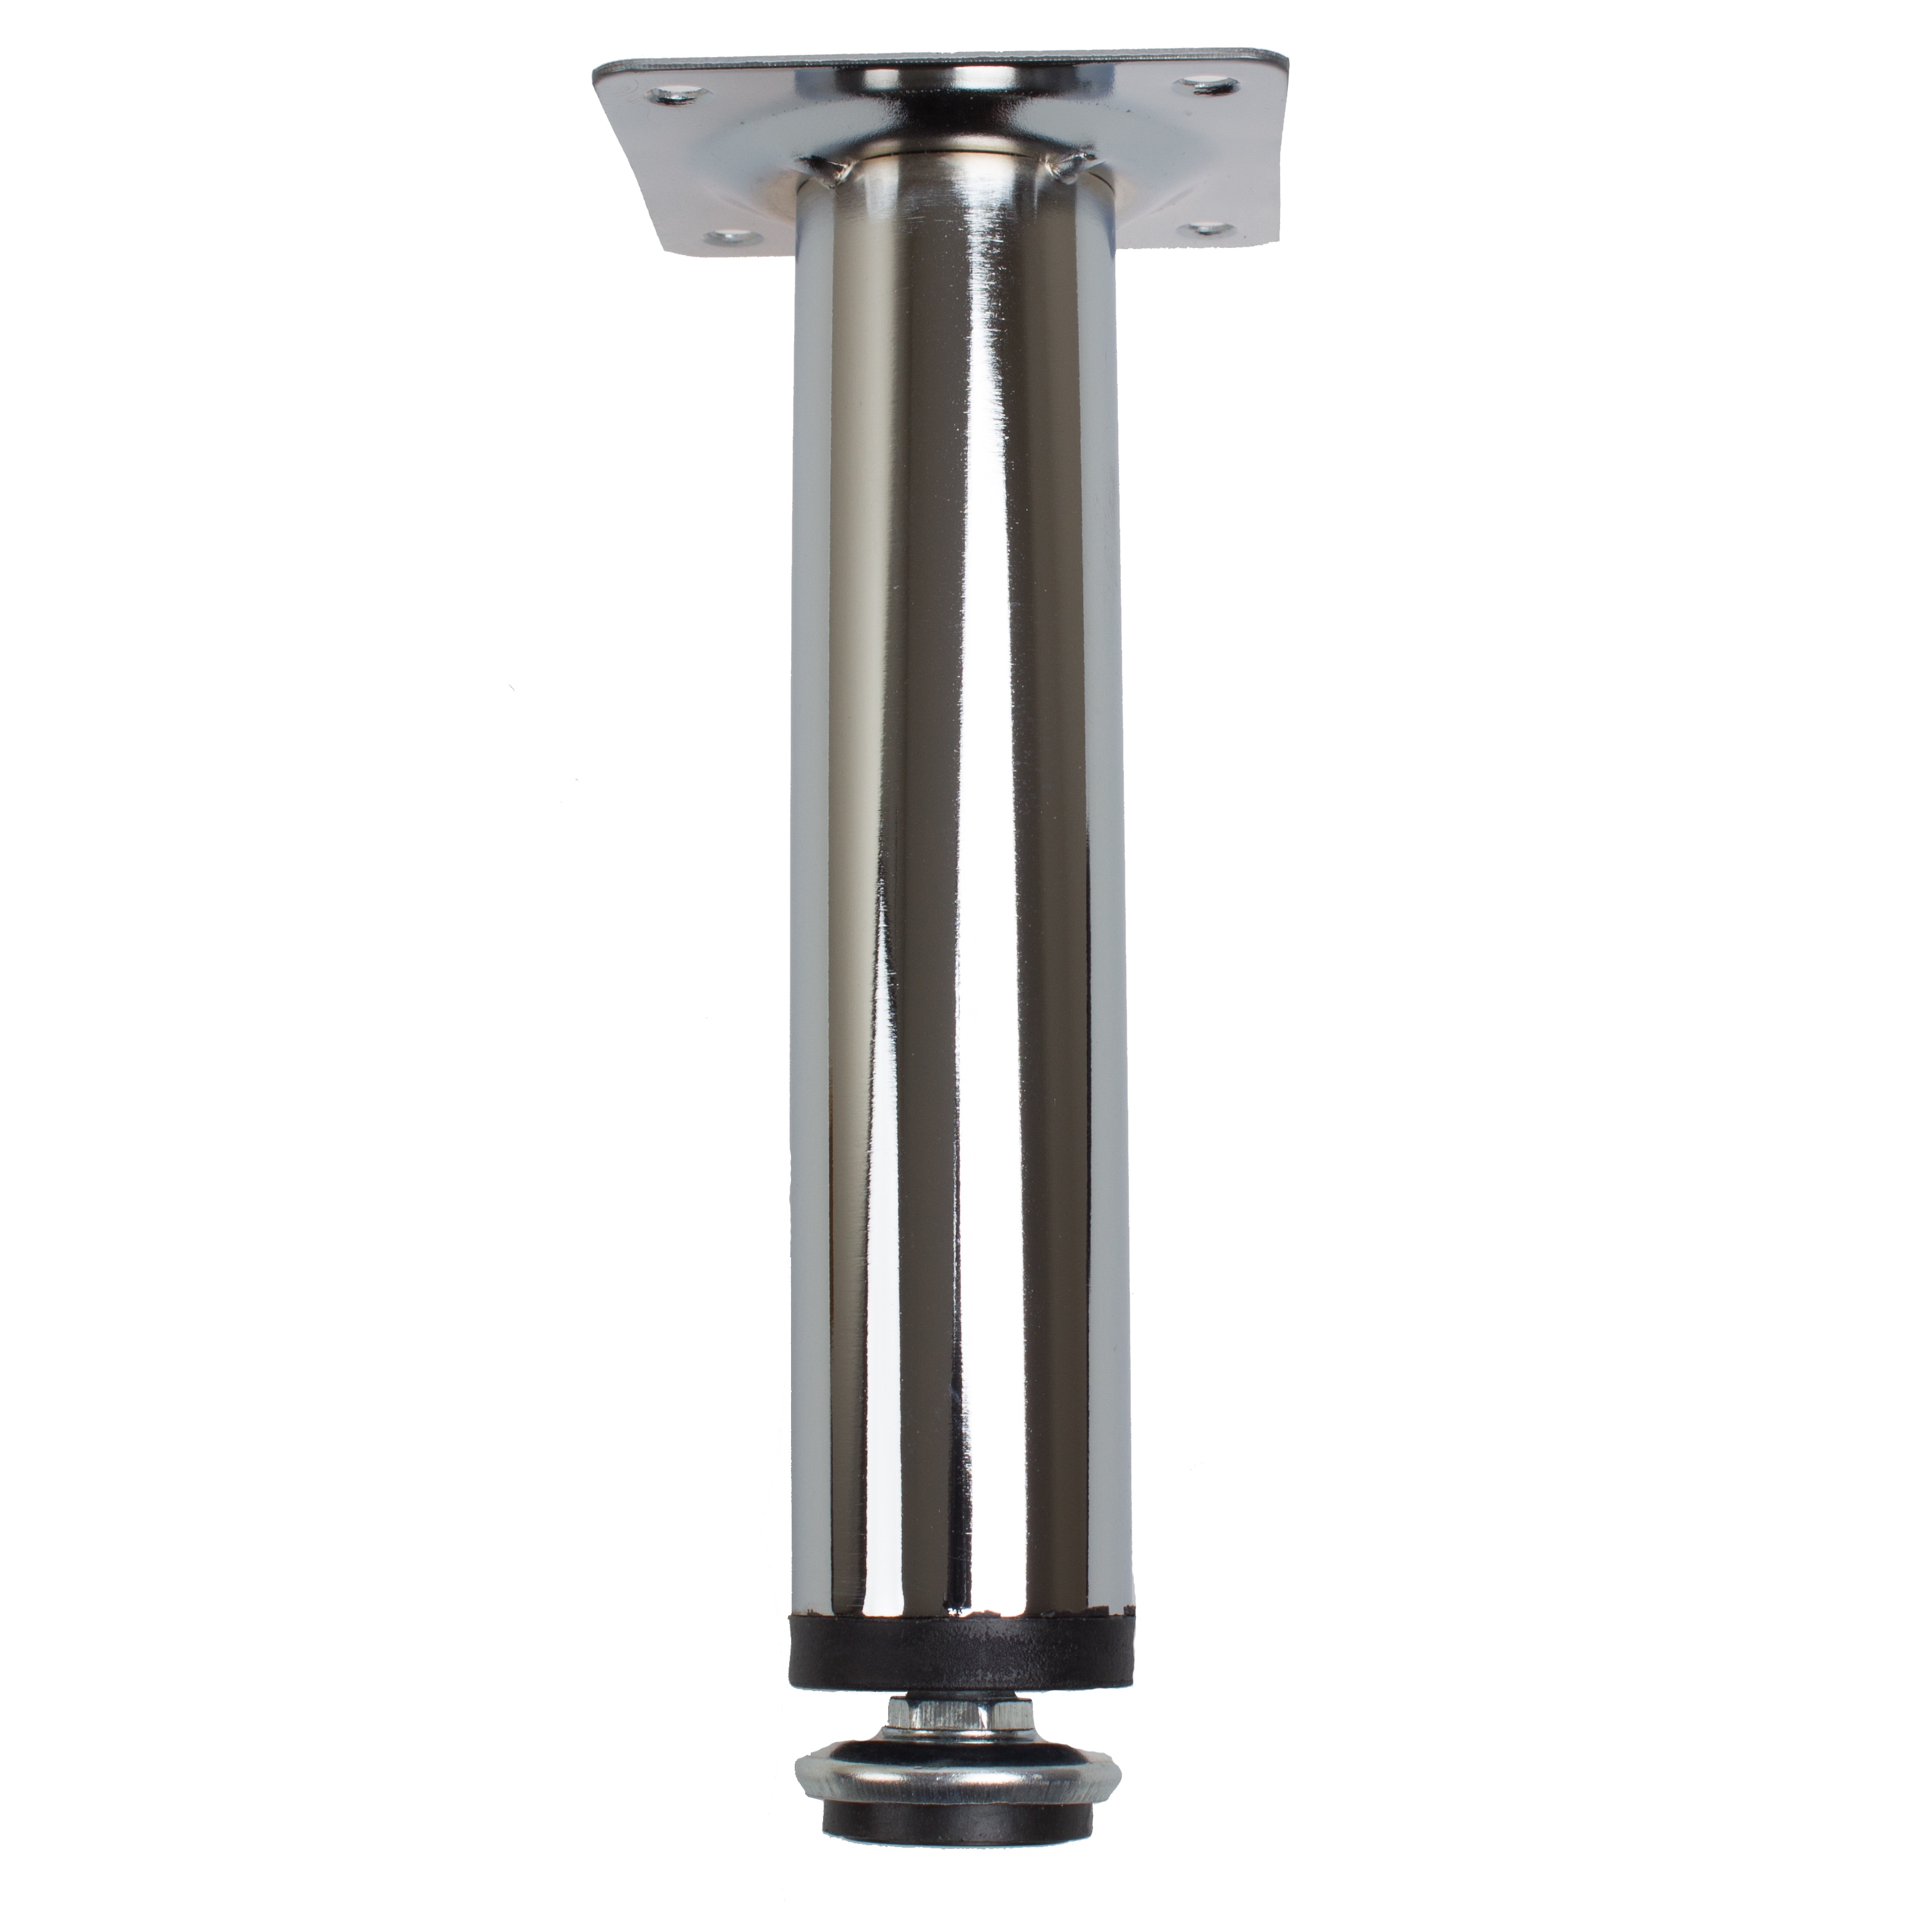 Shop Gliderite Steel Furniture Legs With Leveling Screw Polished